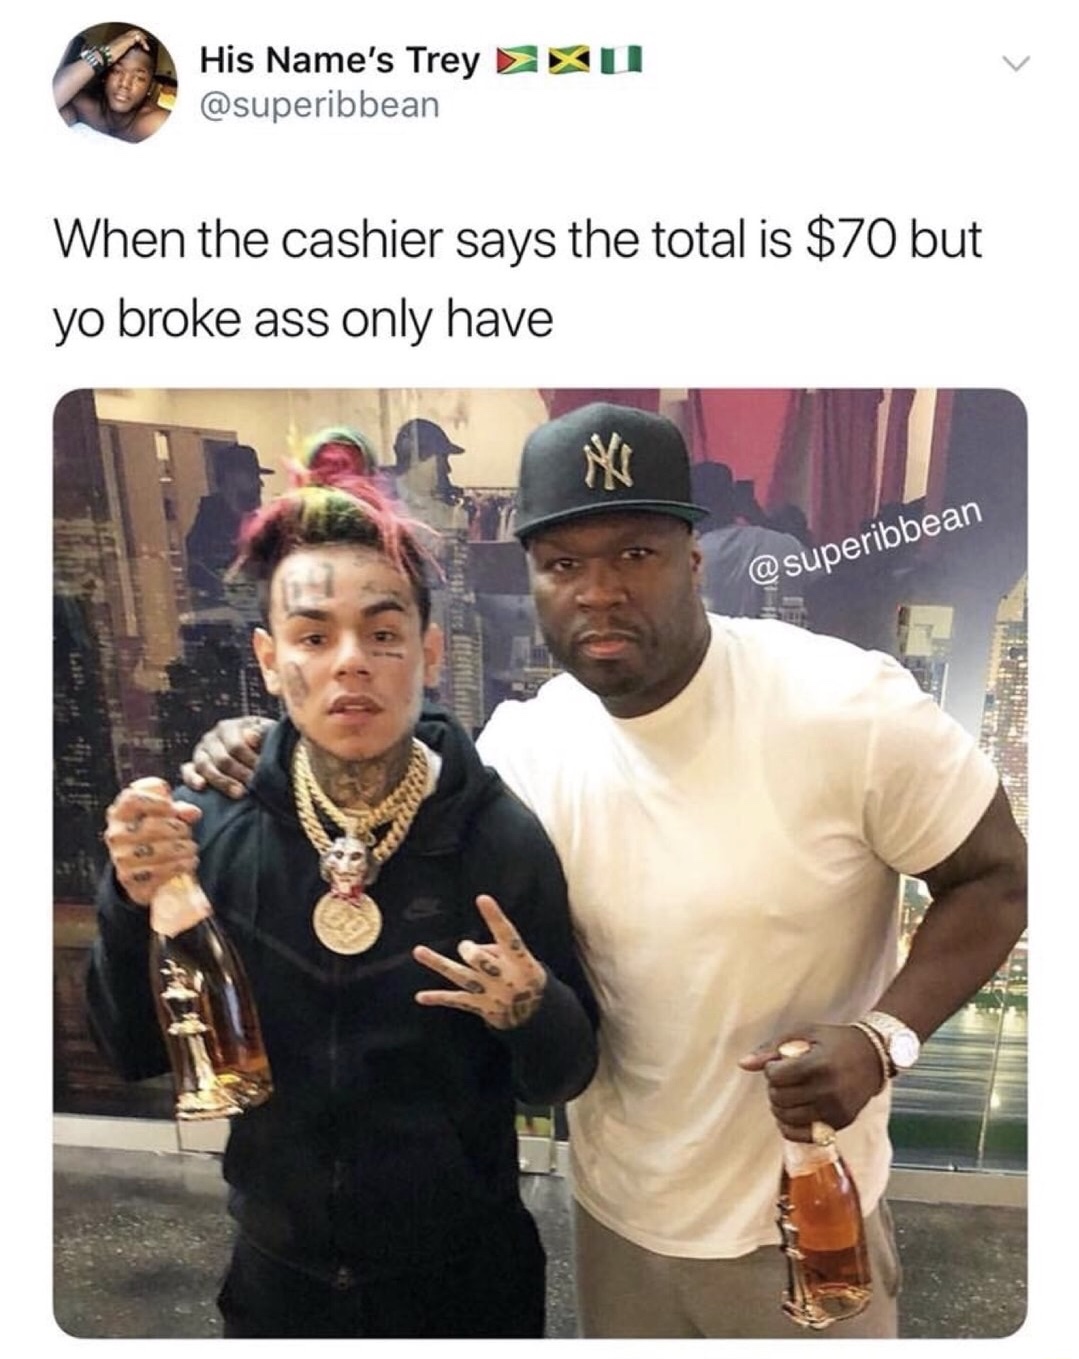 6ix9ine 50 cent - His Name's Trey Uu When the cashier says the total is $70 but yo broke ass only have